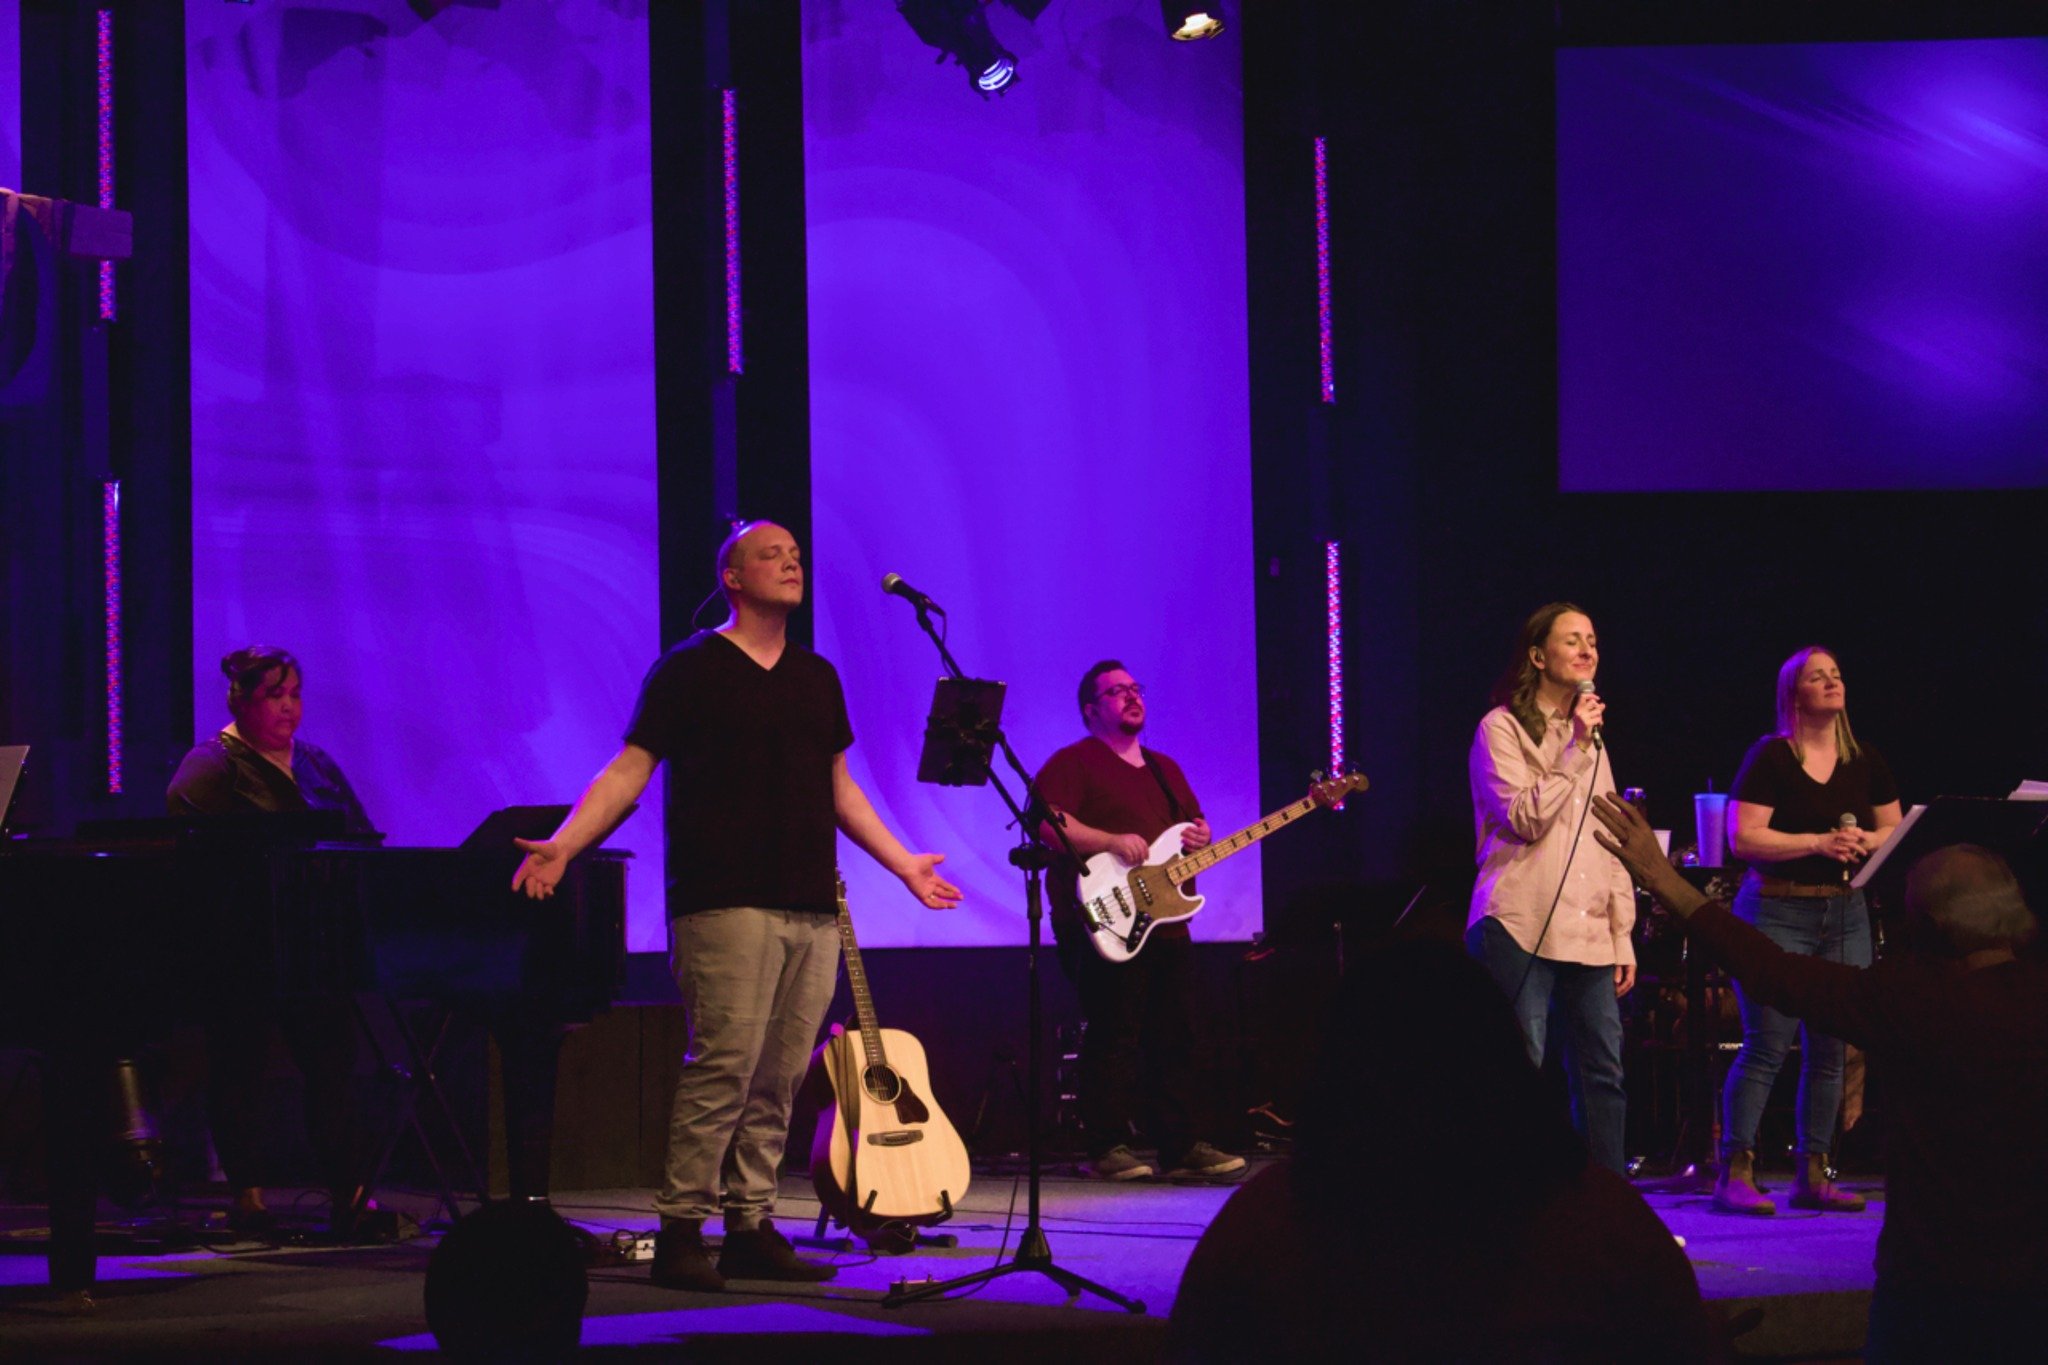 Simply Worship was so good last night!

If you couldn't join us, plan on coming out May 5th for a great time of worship, prayer, and praise with your church family! Everyone is welcome!